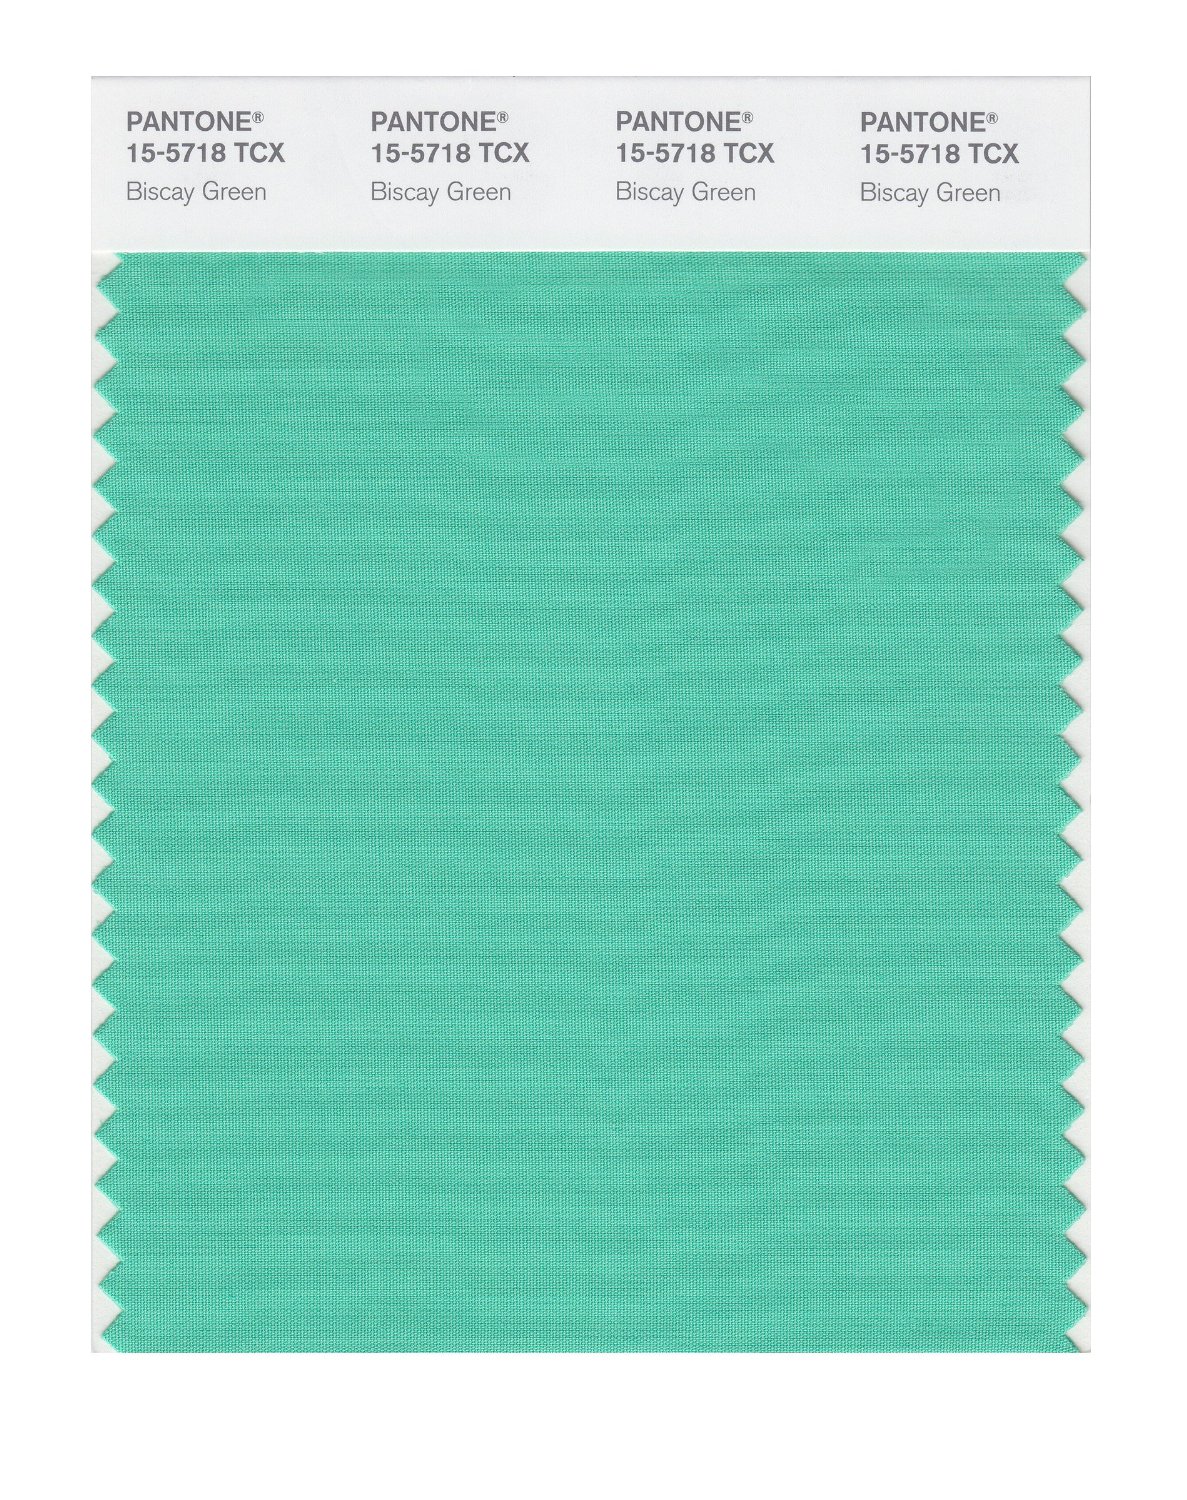 Pantone Cotton Swatch 15-5718 Biscay Green